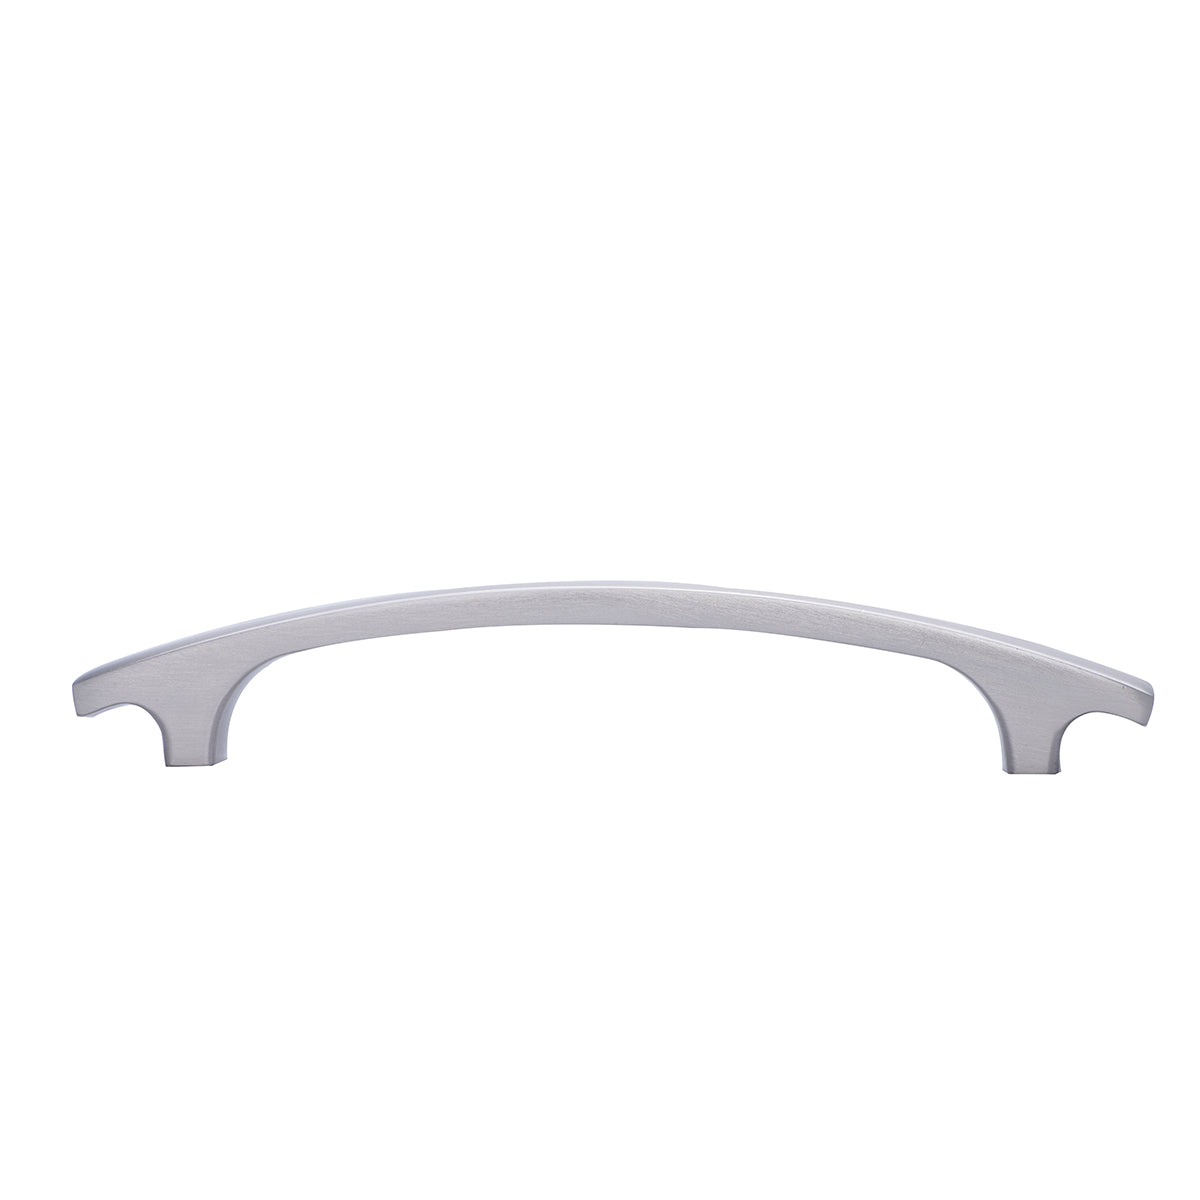 South Main Hardware Modern Curved Bar Cabinet Pull, 6.38